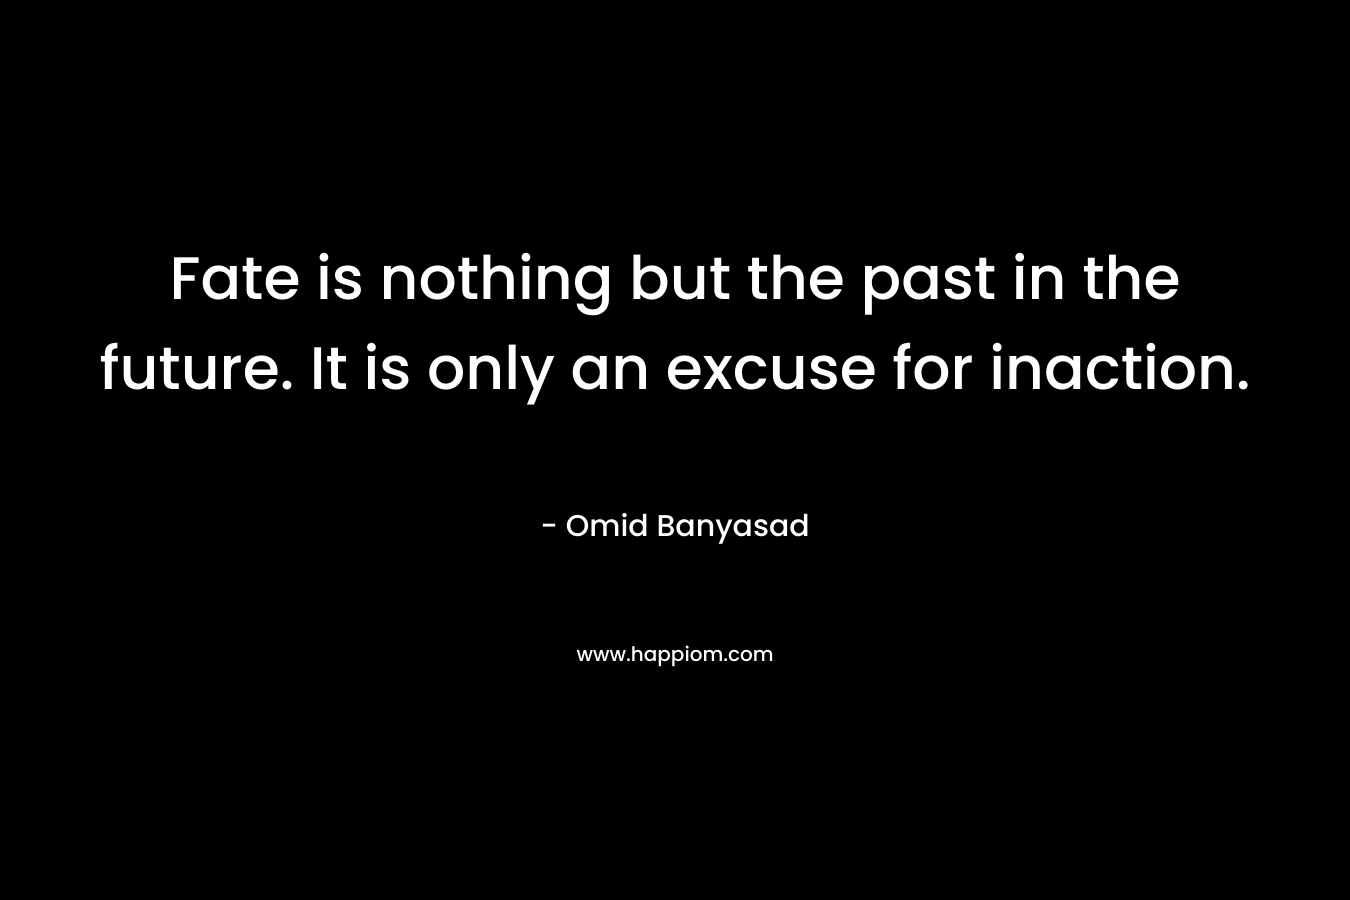 Fate is nothing but the past in the future. It is only an excuse for inaction.